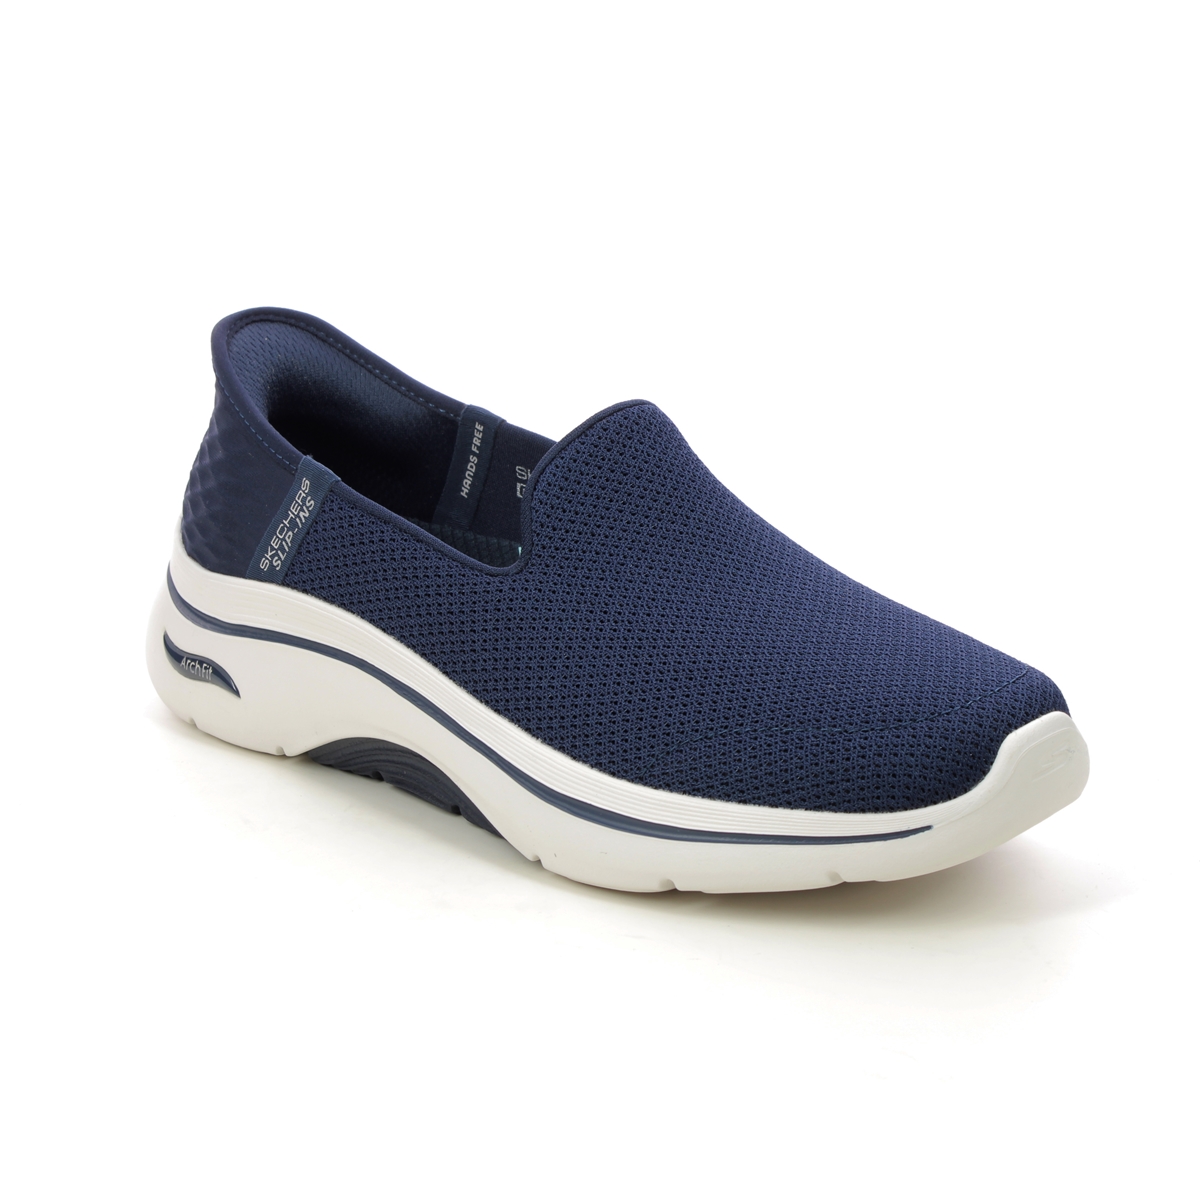 Skechers Slip Ins Arch 2 NVW Navy Womens trainers 125315 in a Plain Textile in Size 6